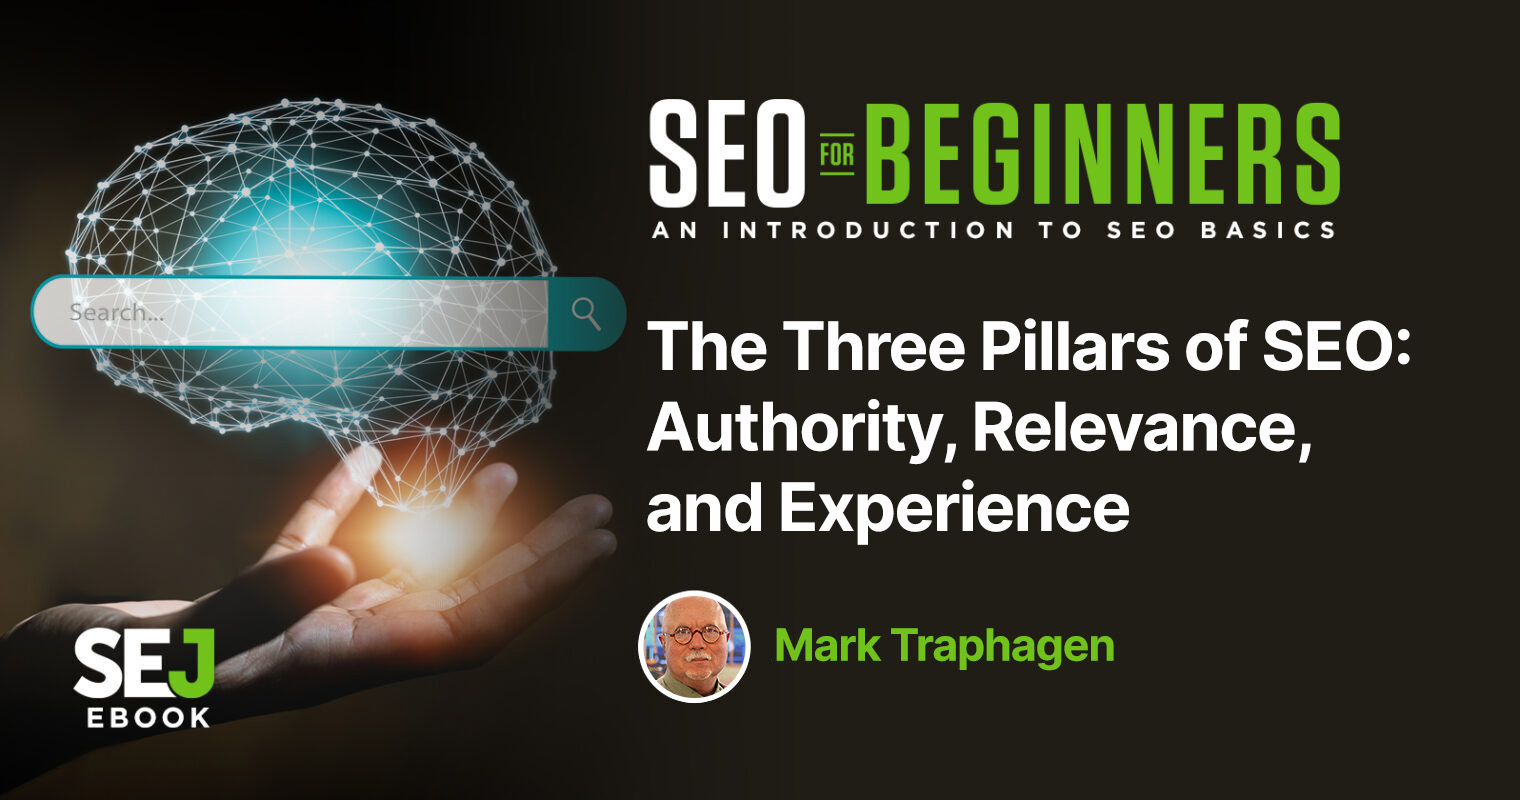 The Three Pillars Of SEO: Authority, Relevance, And Experience via @sejournal, @marktraphagen